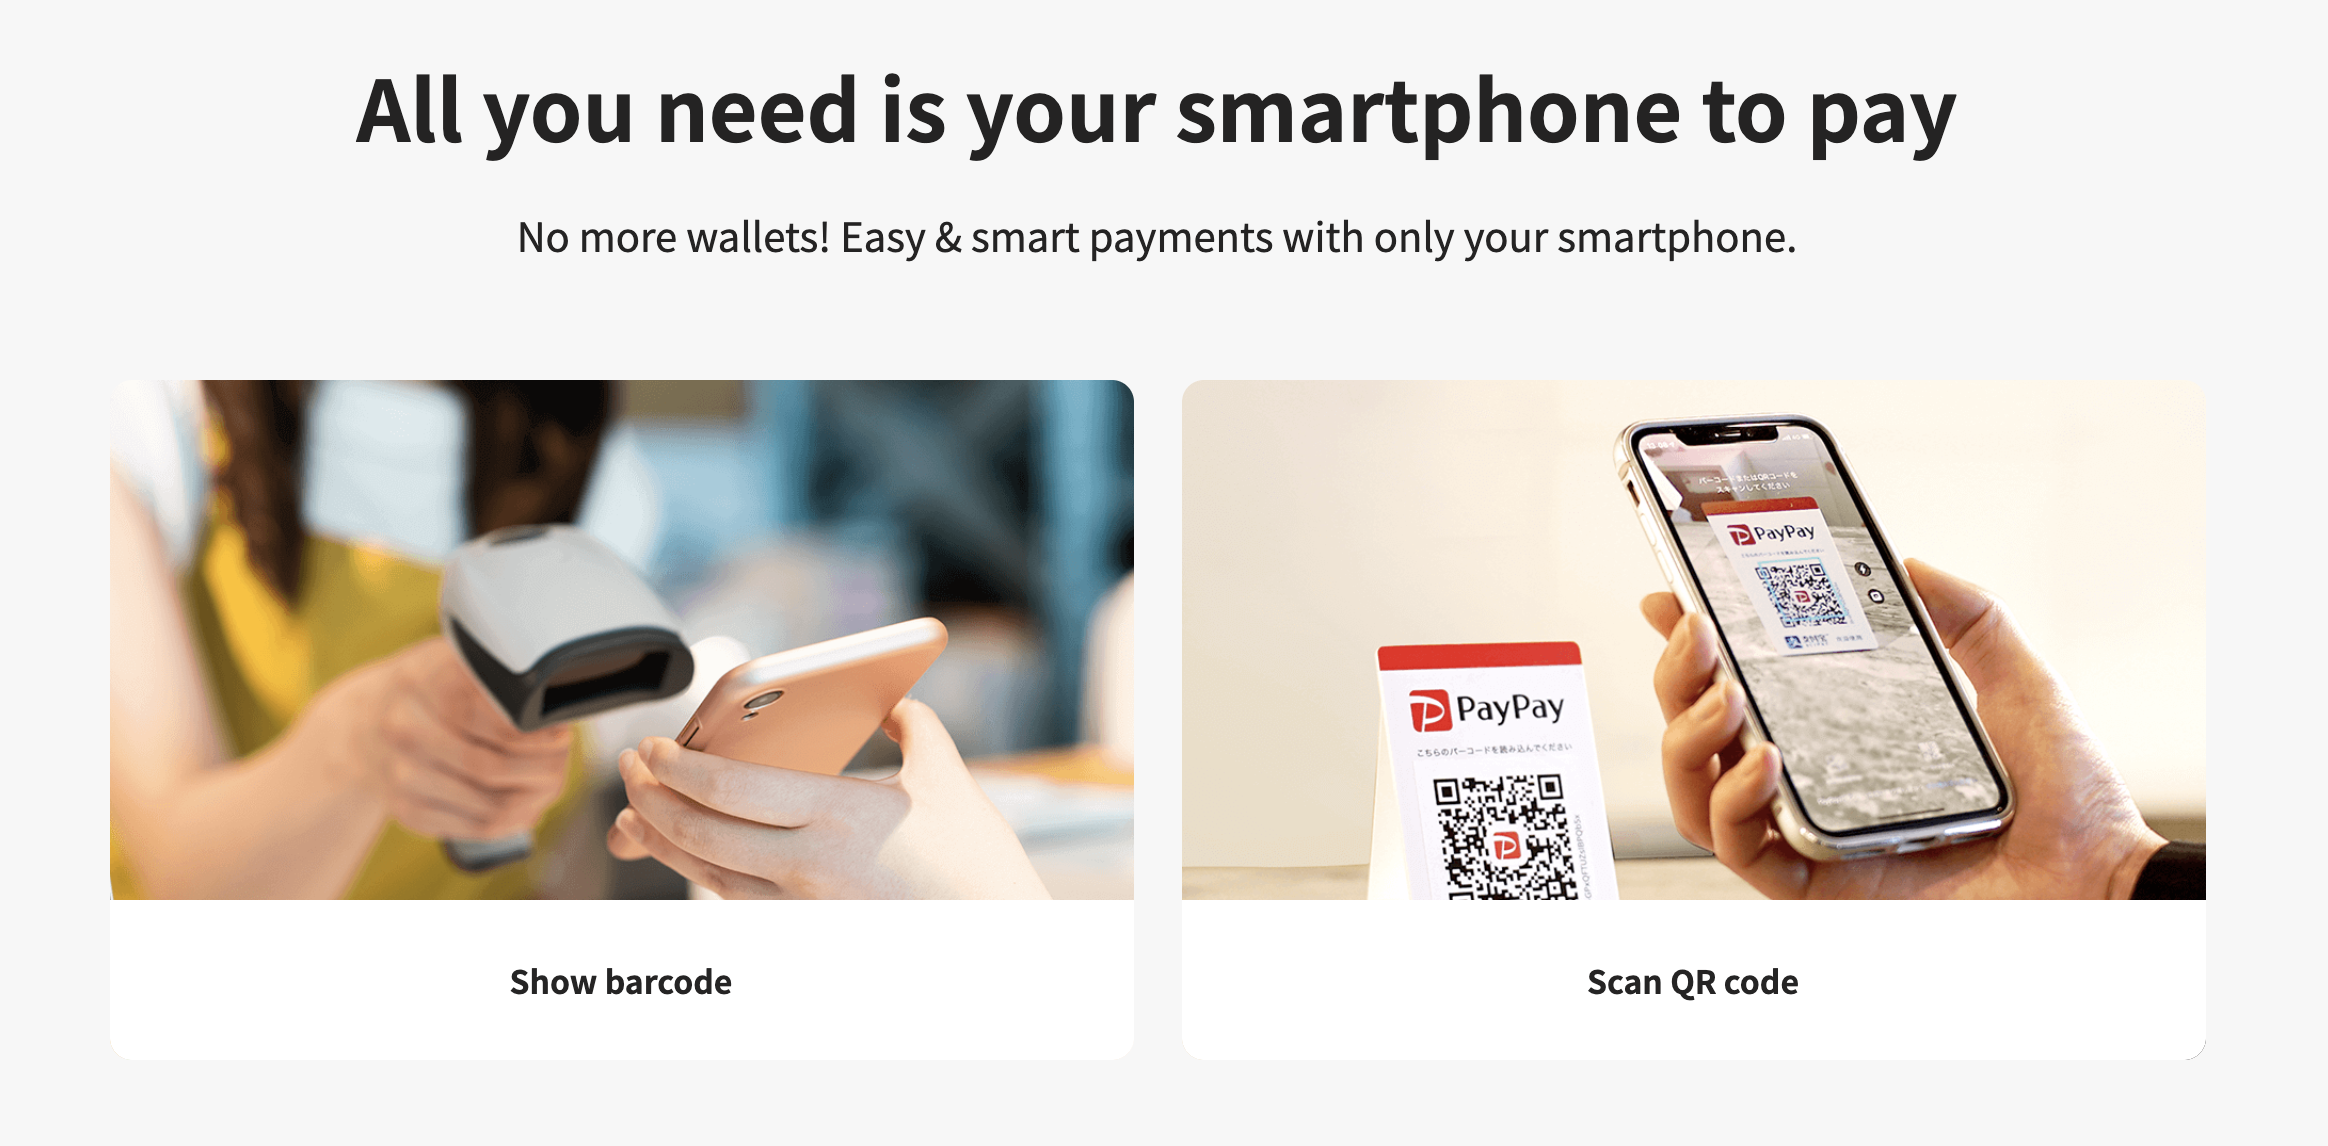 The two ways to pay from https://paypay.ne.jp/